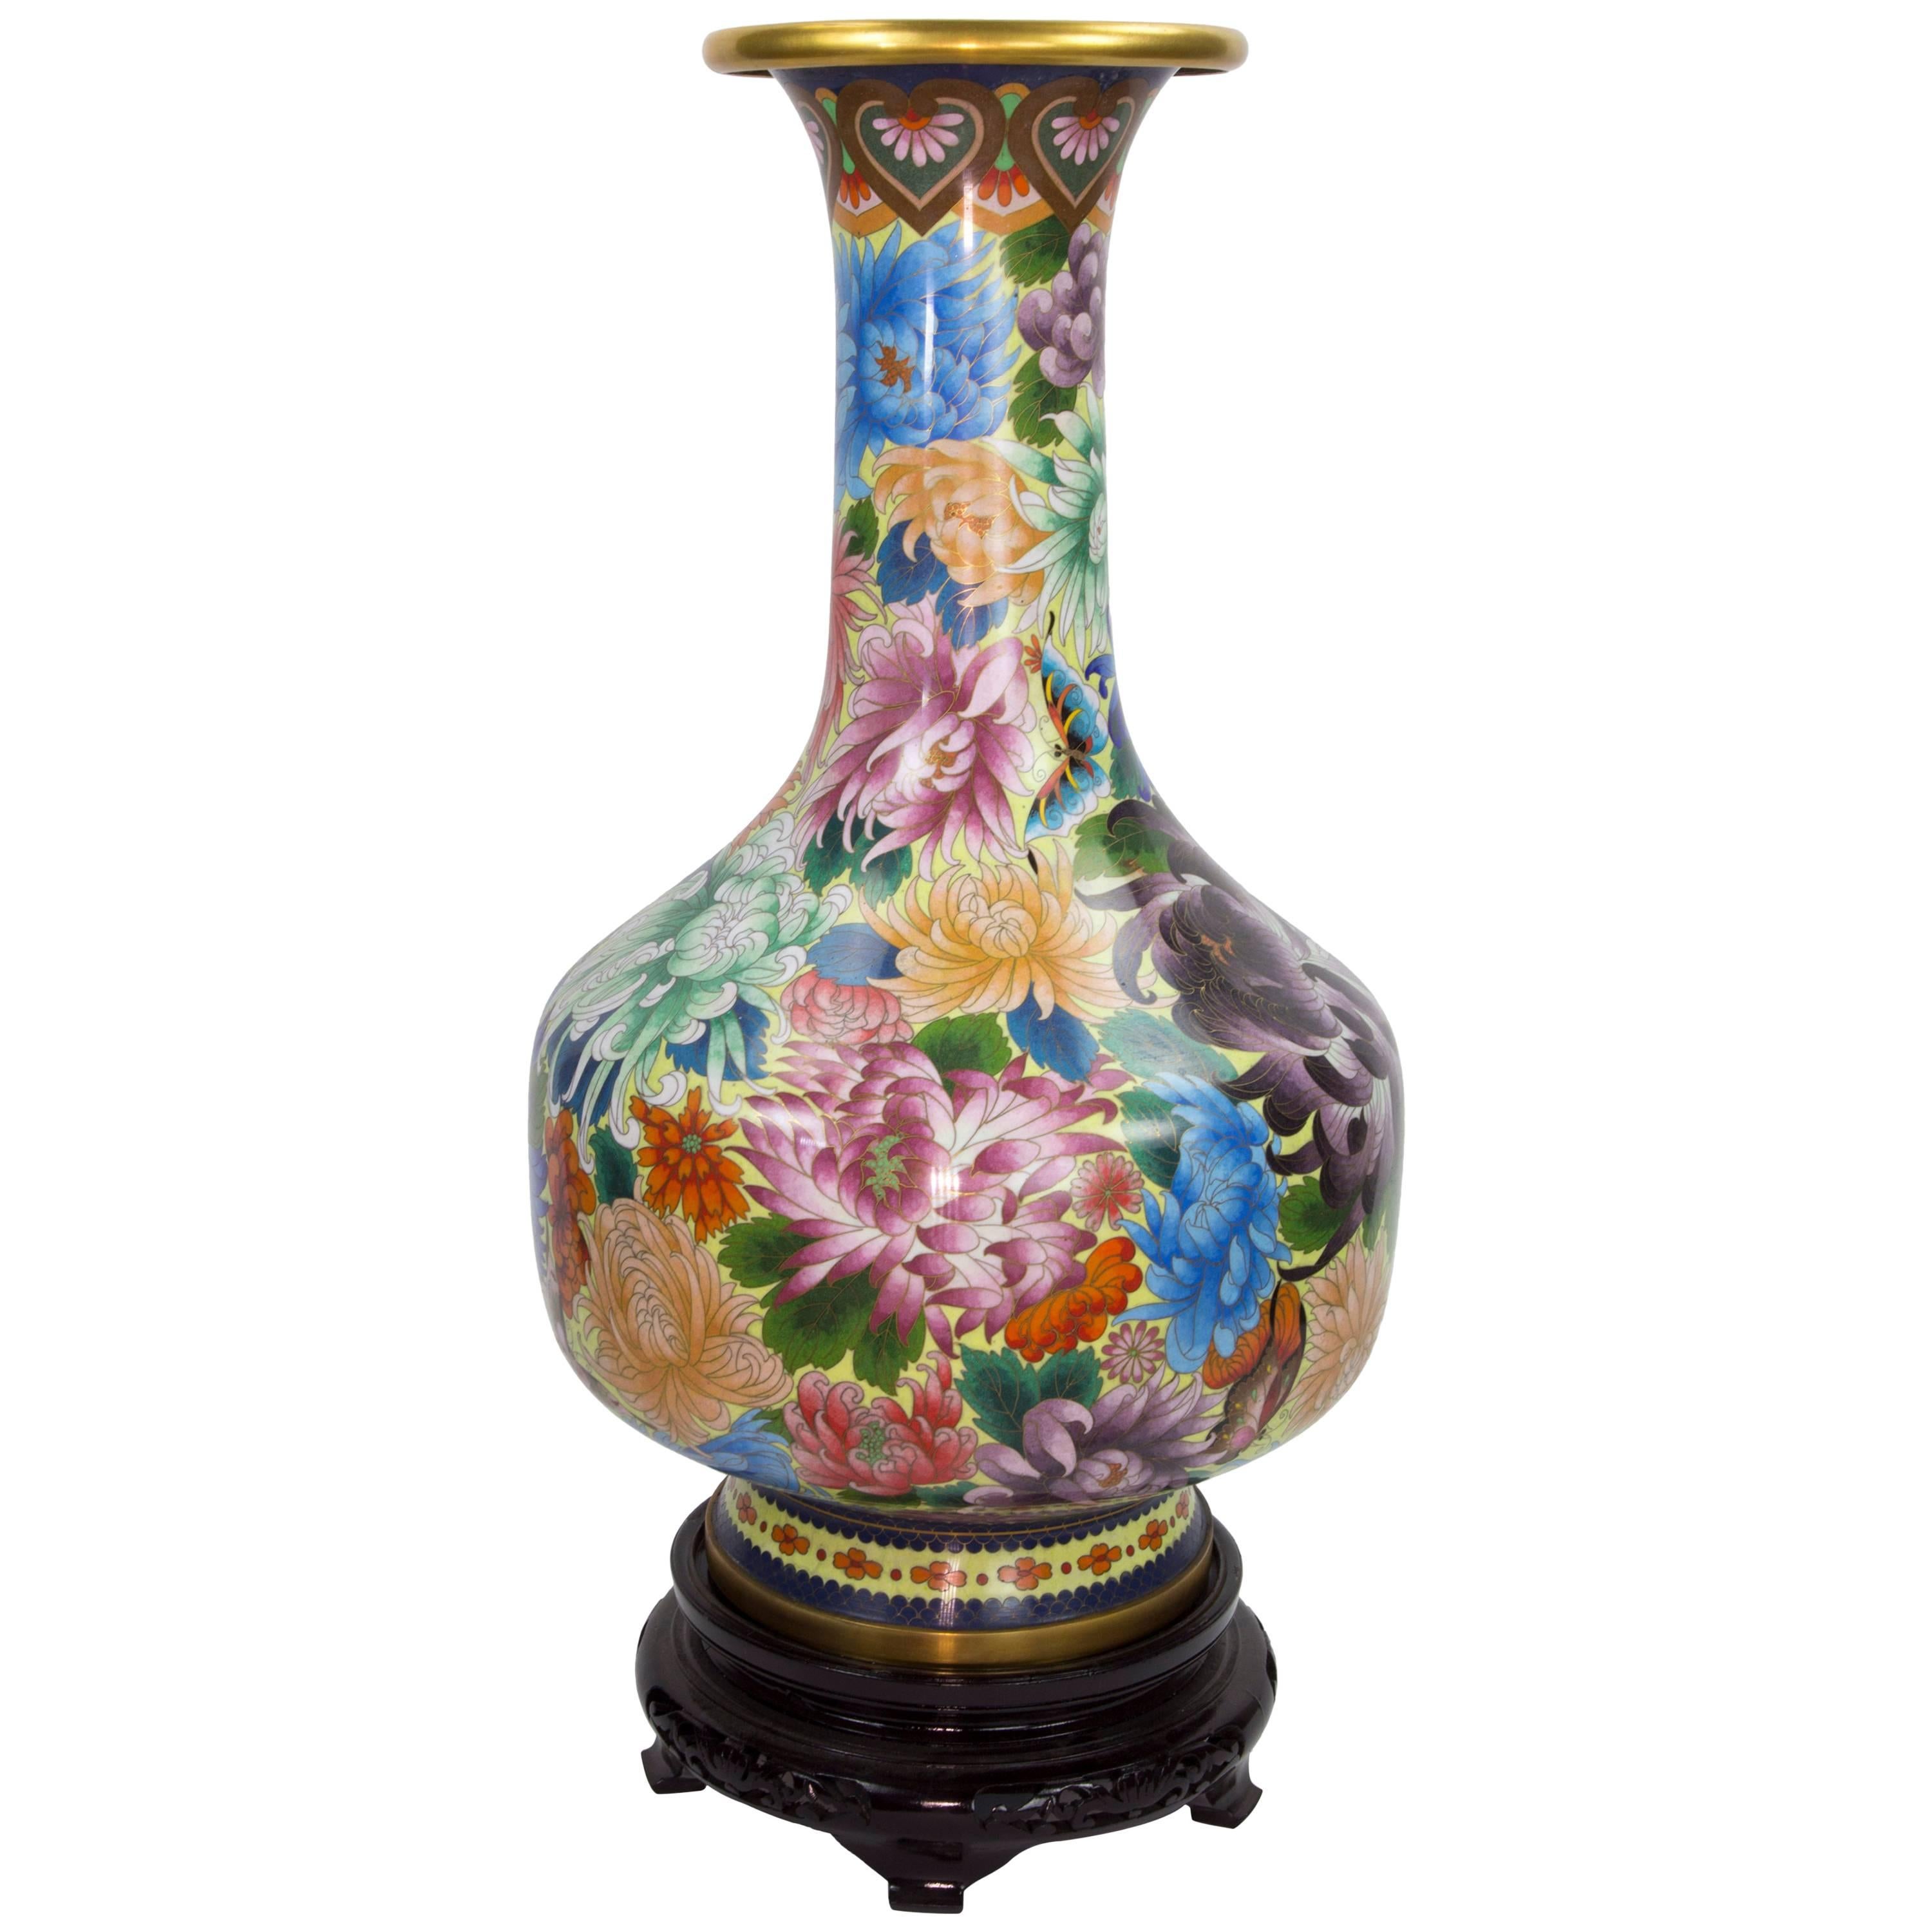 Beautiful Large Chinese Cloisonné Enamel Vase with Carved Wood Stand